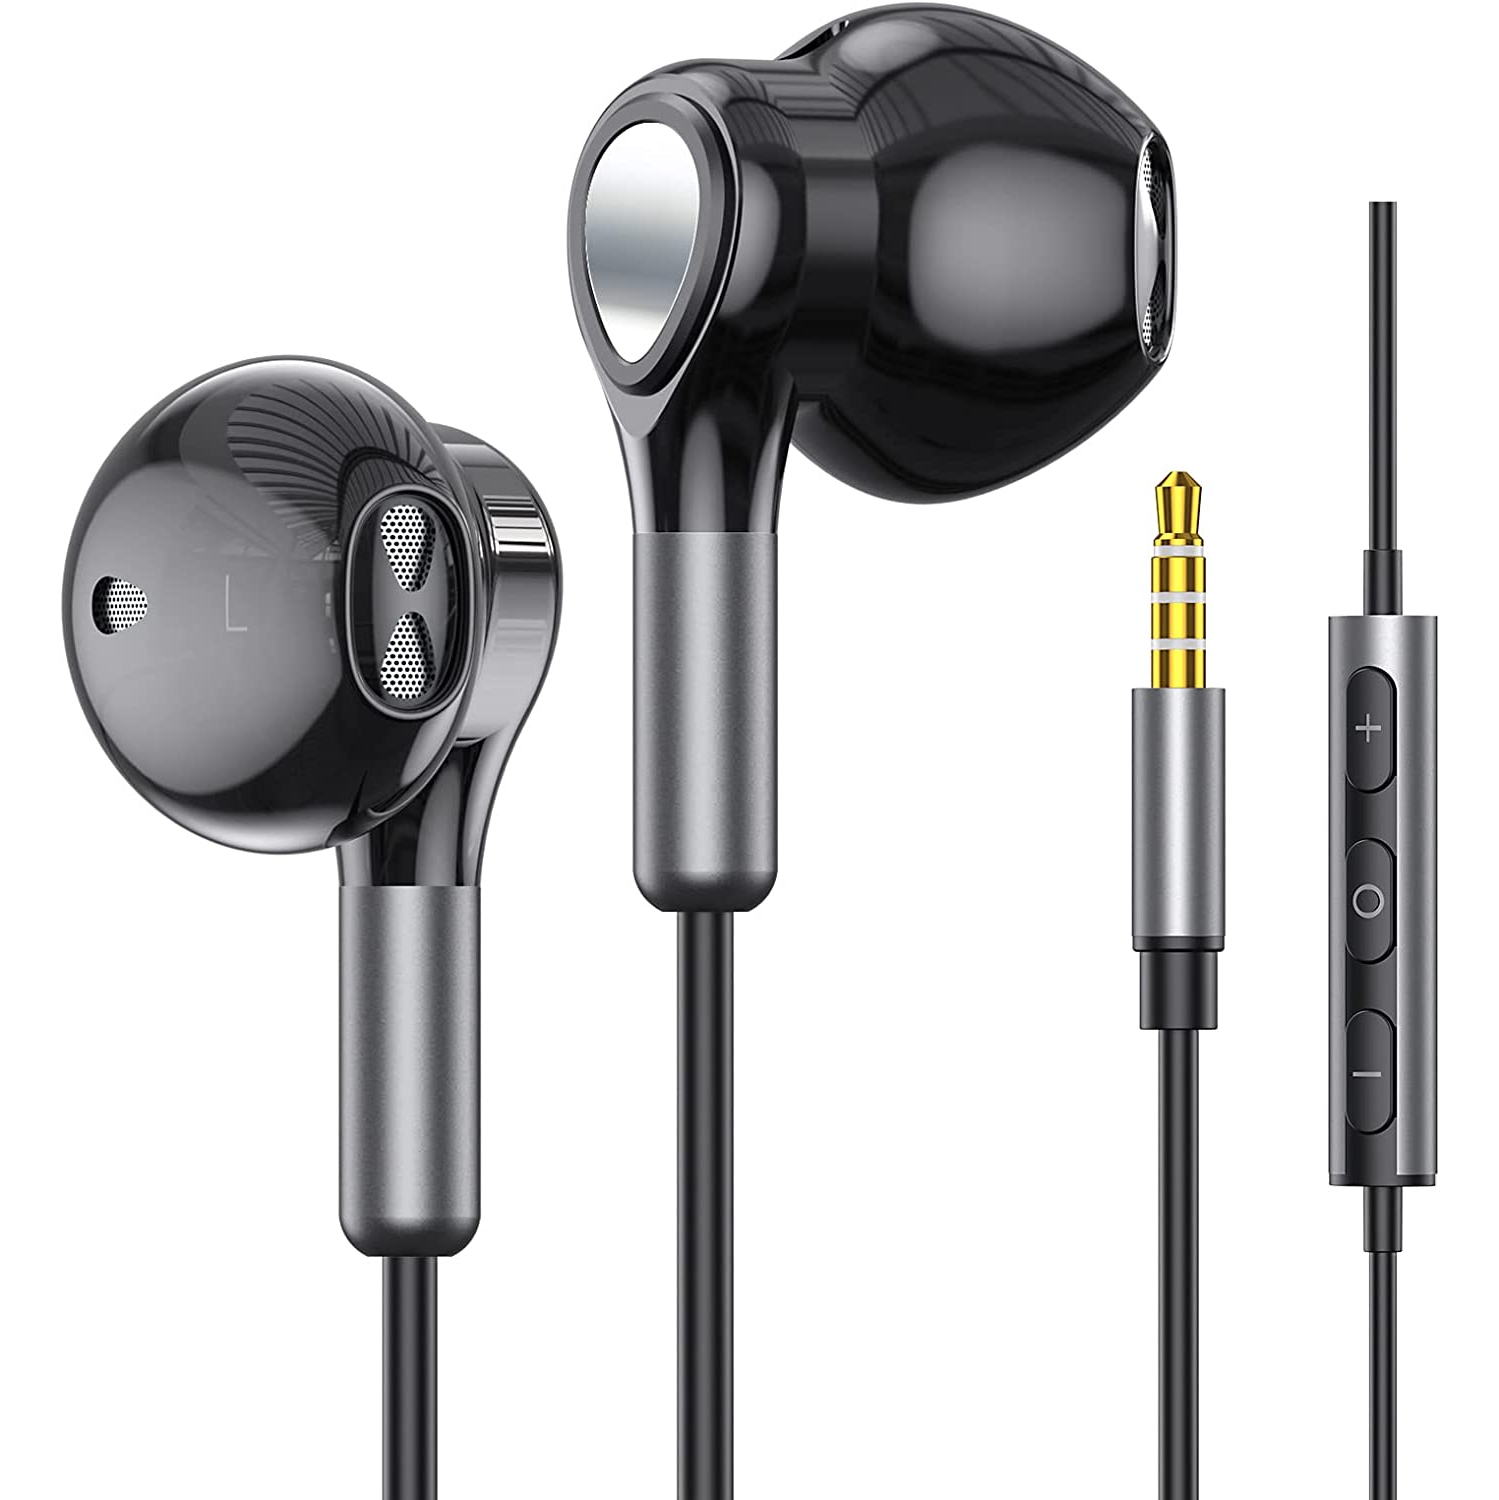 Wired Headphones with Microphone, 3.5mm Wired Earbuds HiFi Stereo Earphones in-Ear Headphones with Mic Built-in Volume